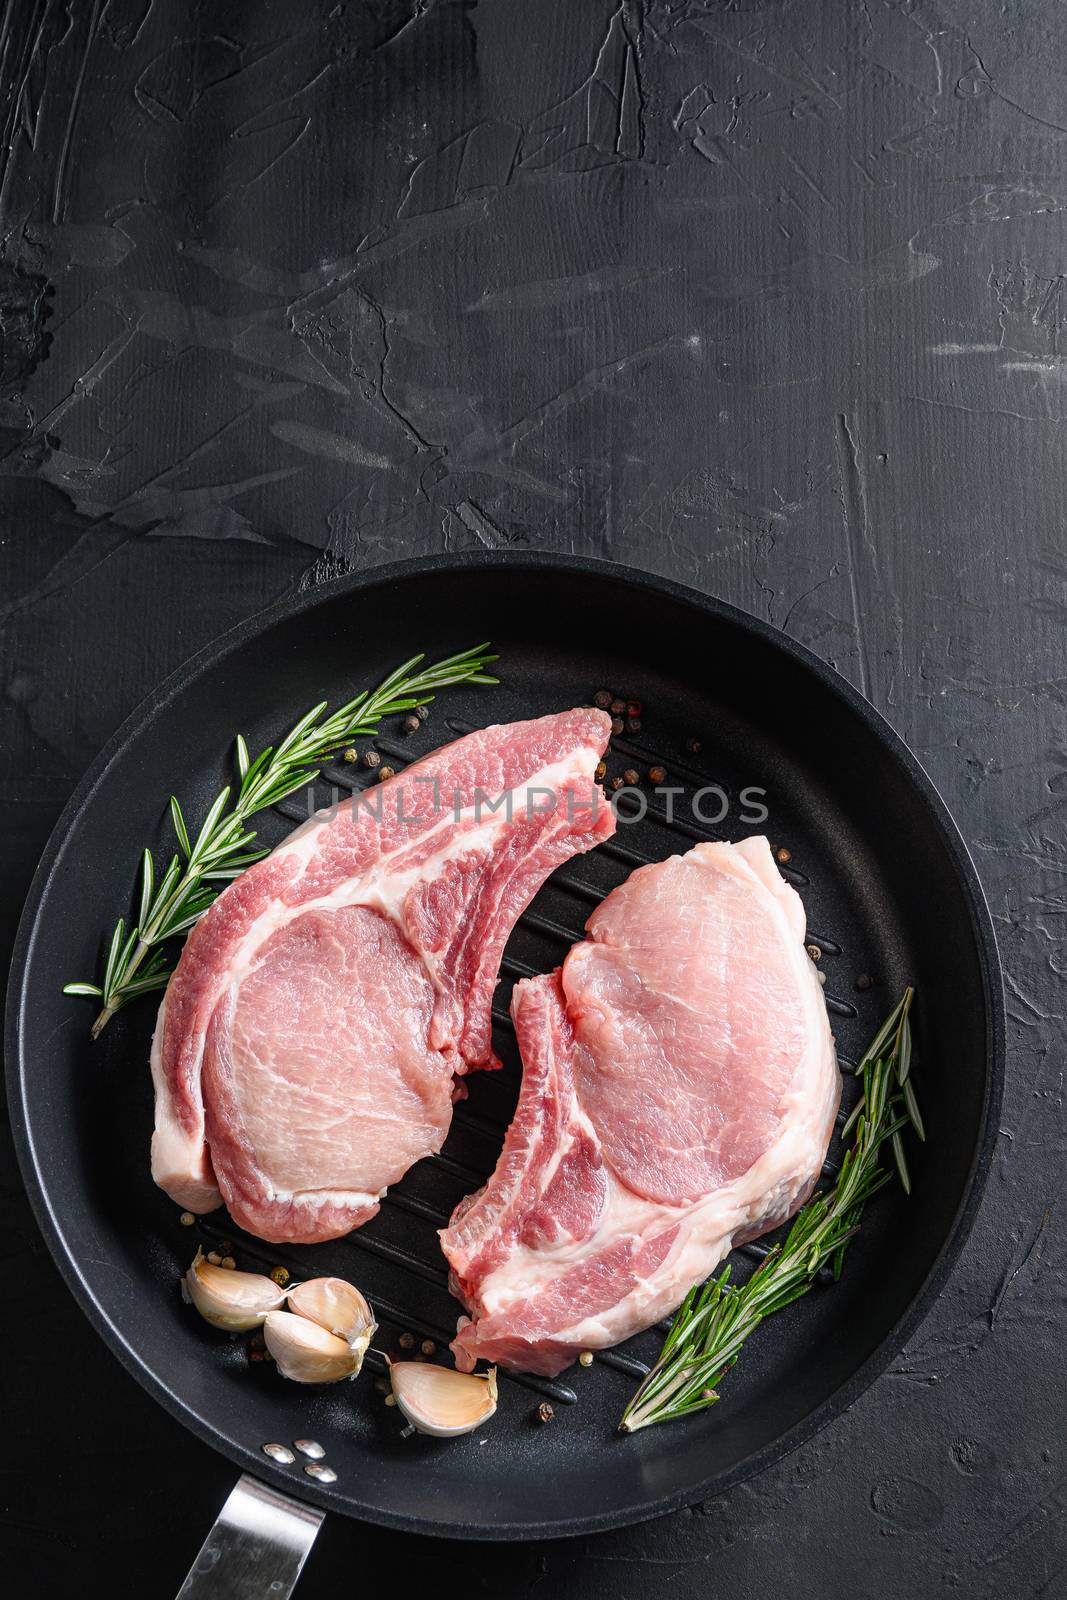 pork rib chops in frying pan grill skillet with herbs, spices top view black stone bakground space for text vertical.